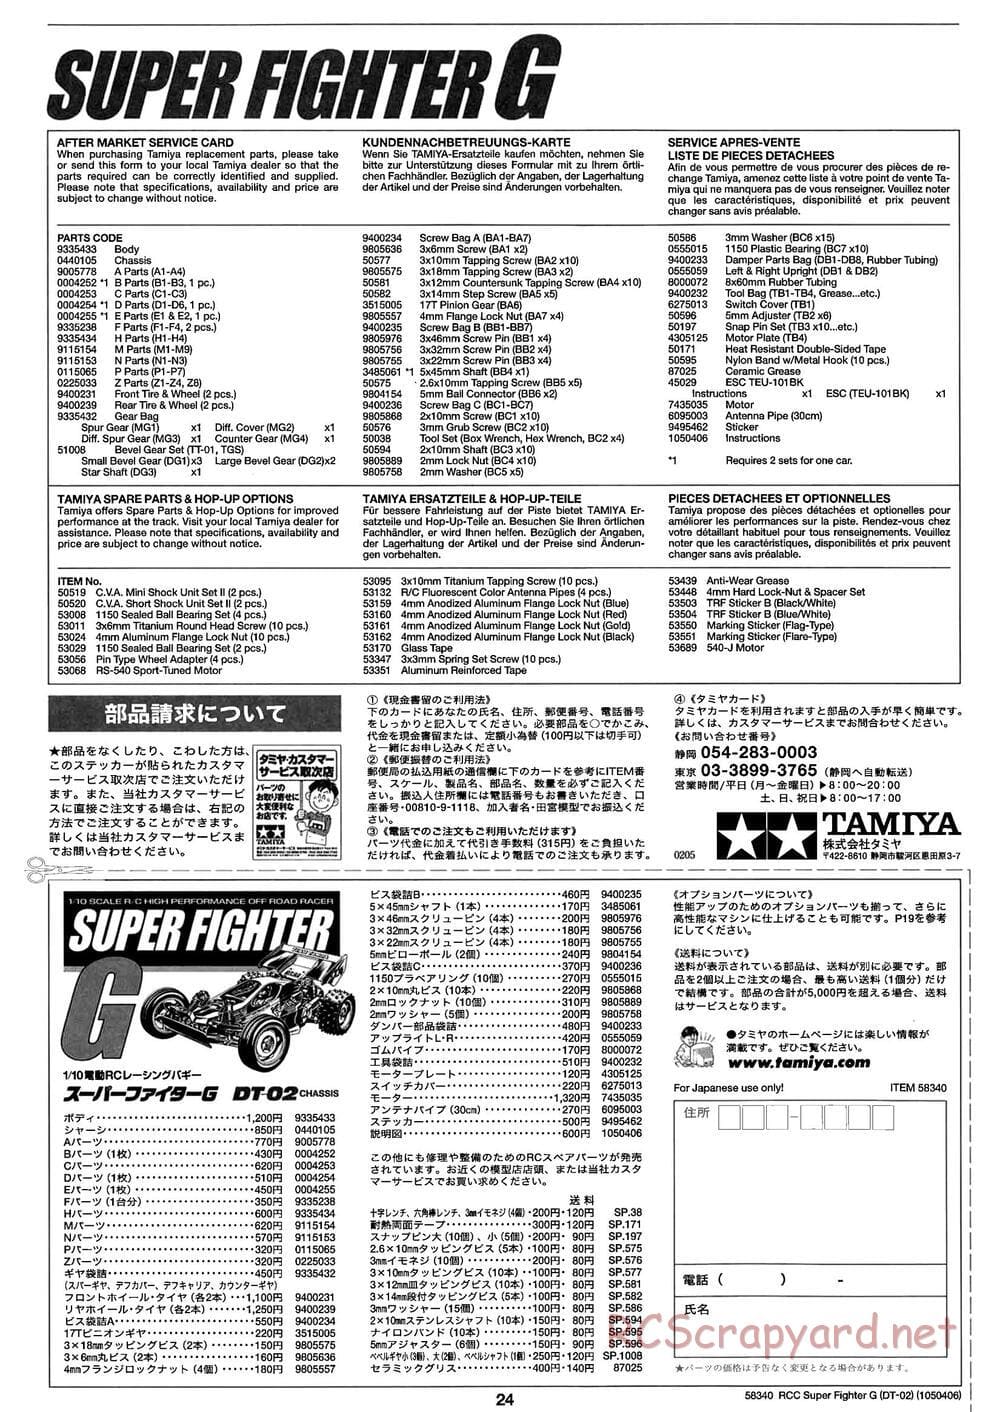 Tamiya - Super Fighter G Chassis - Manual - Page 24